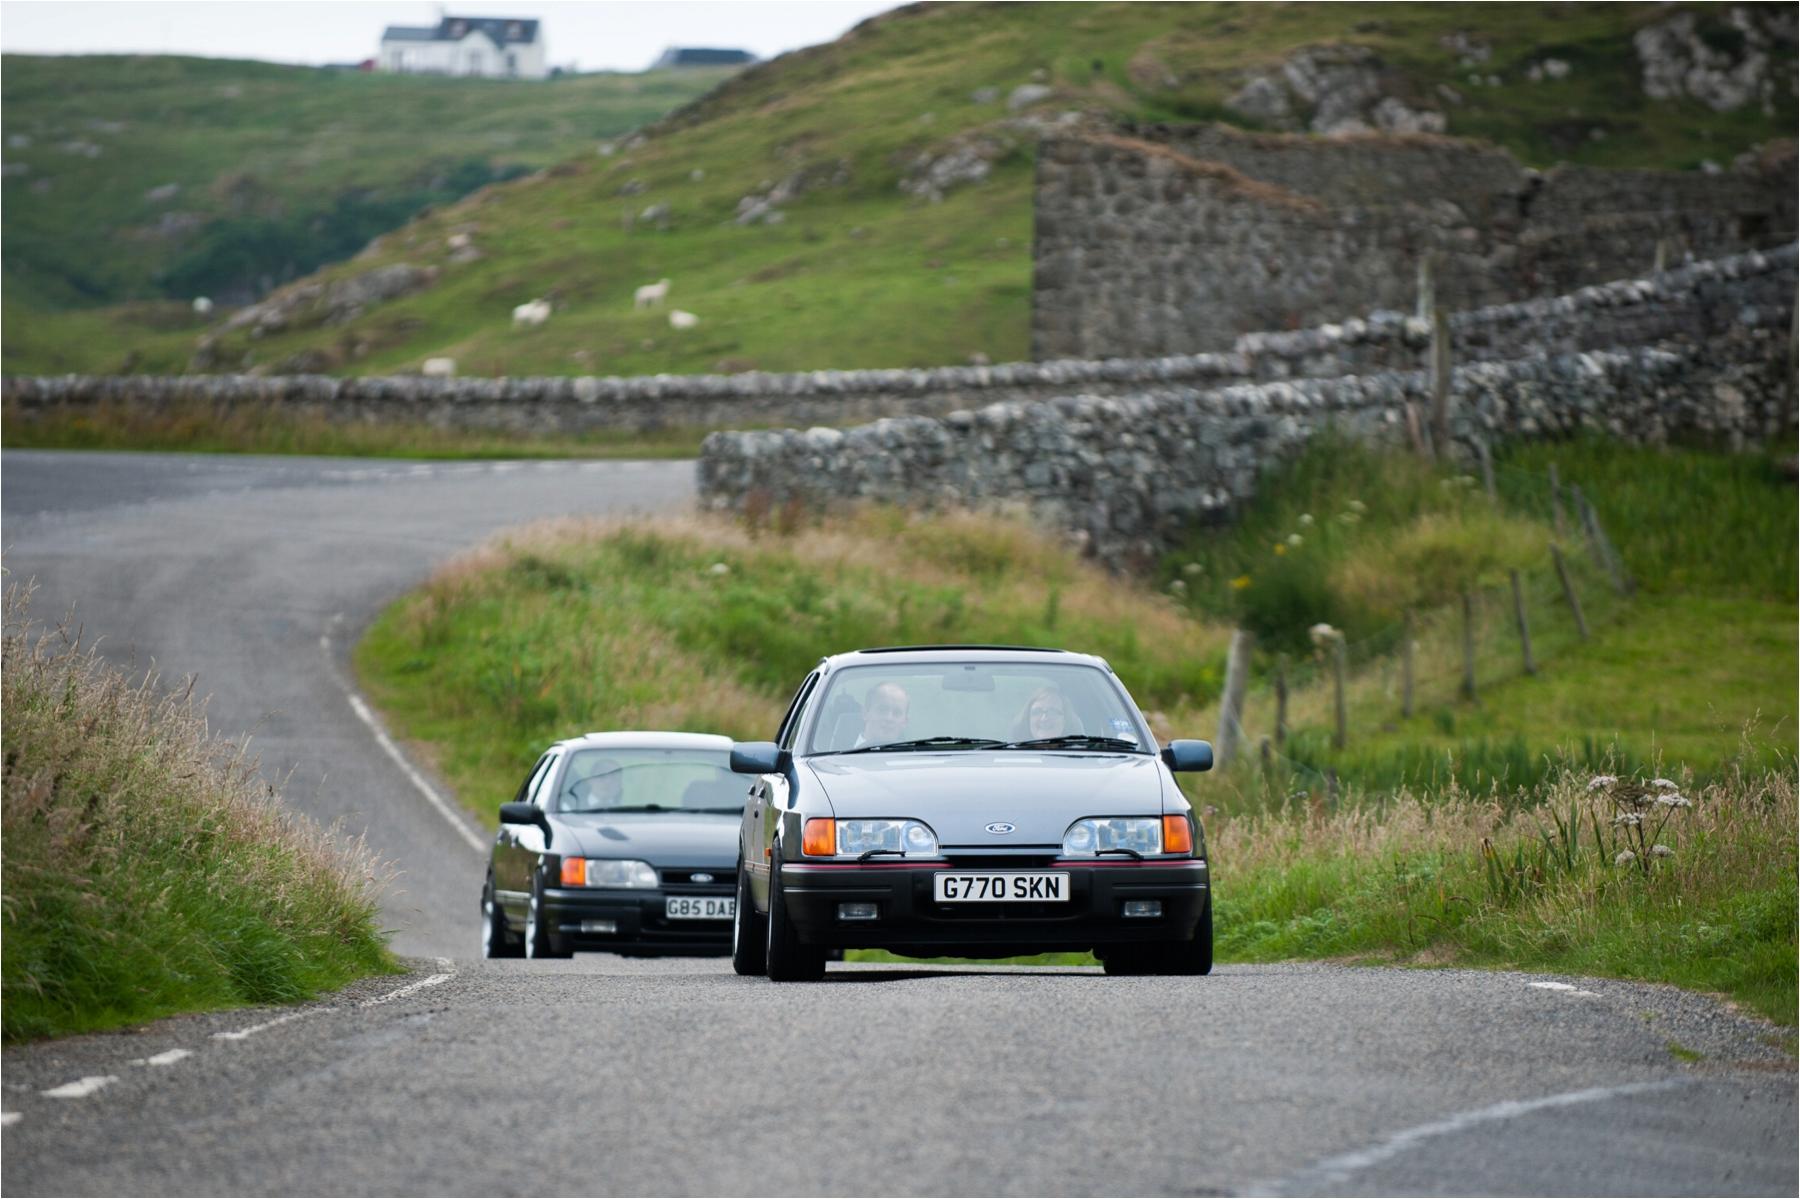 A set of four classic Fords were used to drive the groom and his groomsmen to his wedding at the Church of St Clements in Rodel on the Isle of Harris.